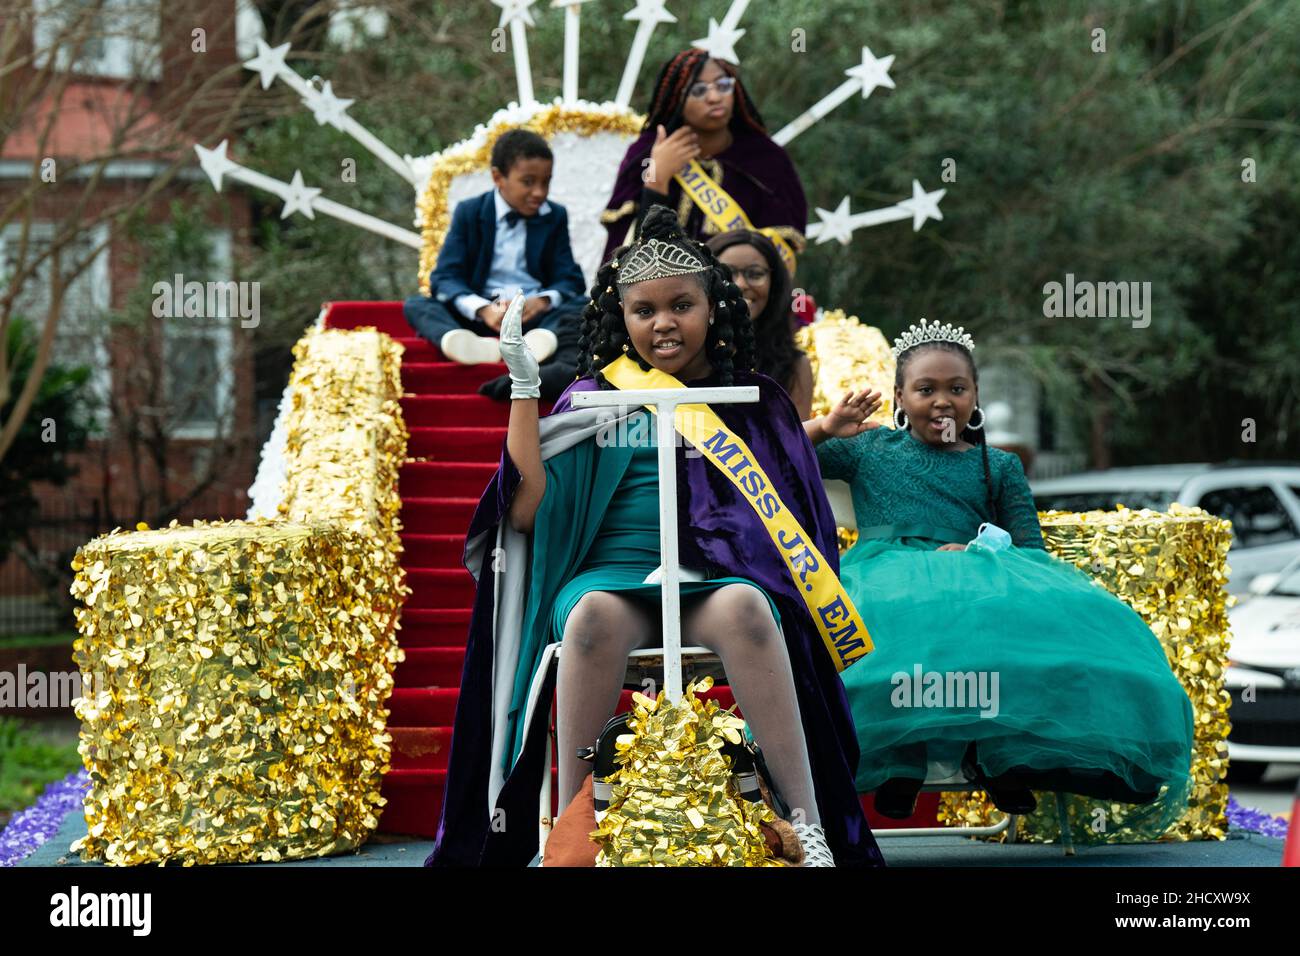 Charleston, United States Of America. 02nd Jan, 2022. Charleston, United States of America. 02 January, 2022. A float carrying the Emancipation beauty queens passes during the 156th annual Emancipation Proclamation parade celebrating the freeing of African-American slaves, January 1, 2022 in Charleston, South Carolina. The parade has been held on New Year Day since 1866 and is the oldest parade in the country commemorating the day President Abraham Lincoln abolish slavery. Credit: Richard Ellis/Richard Ellis/Alamy Live News Stock Photo